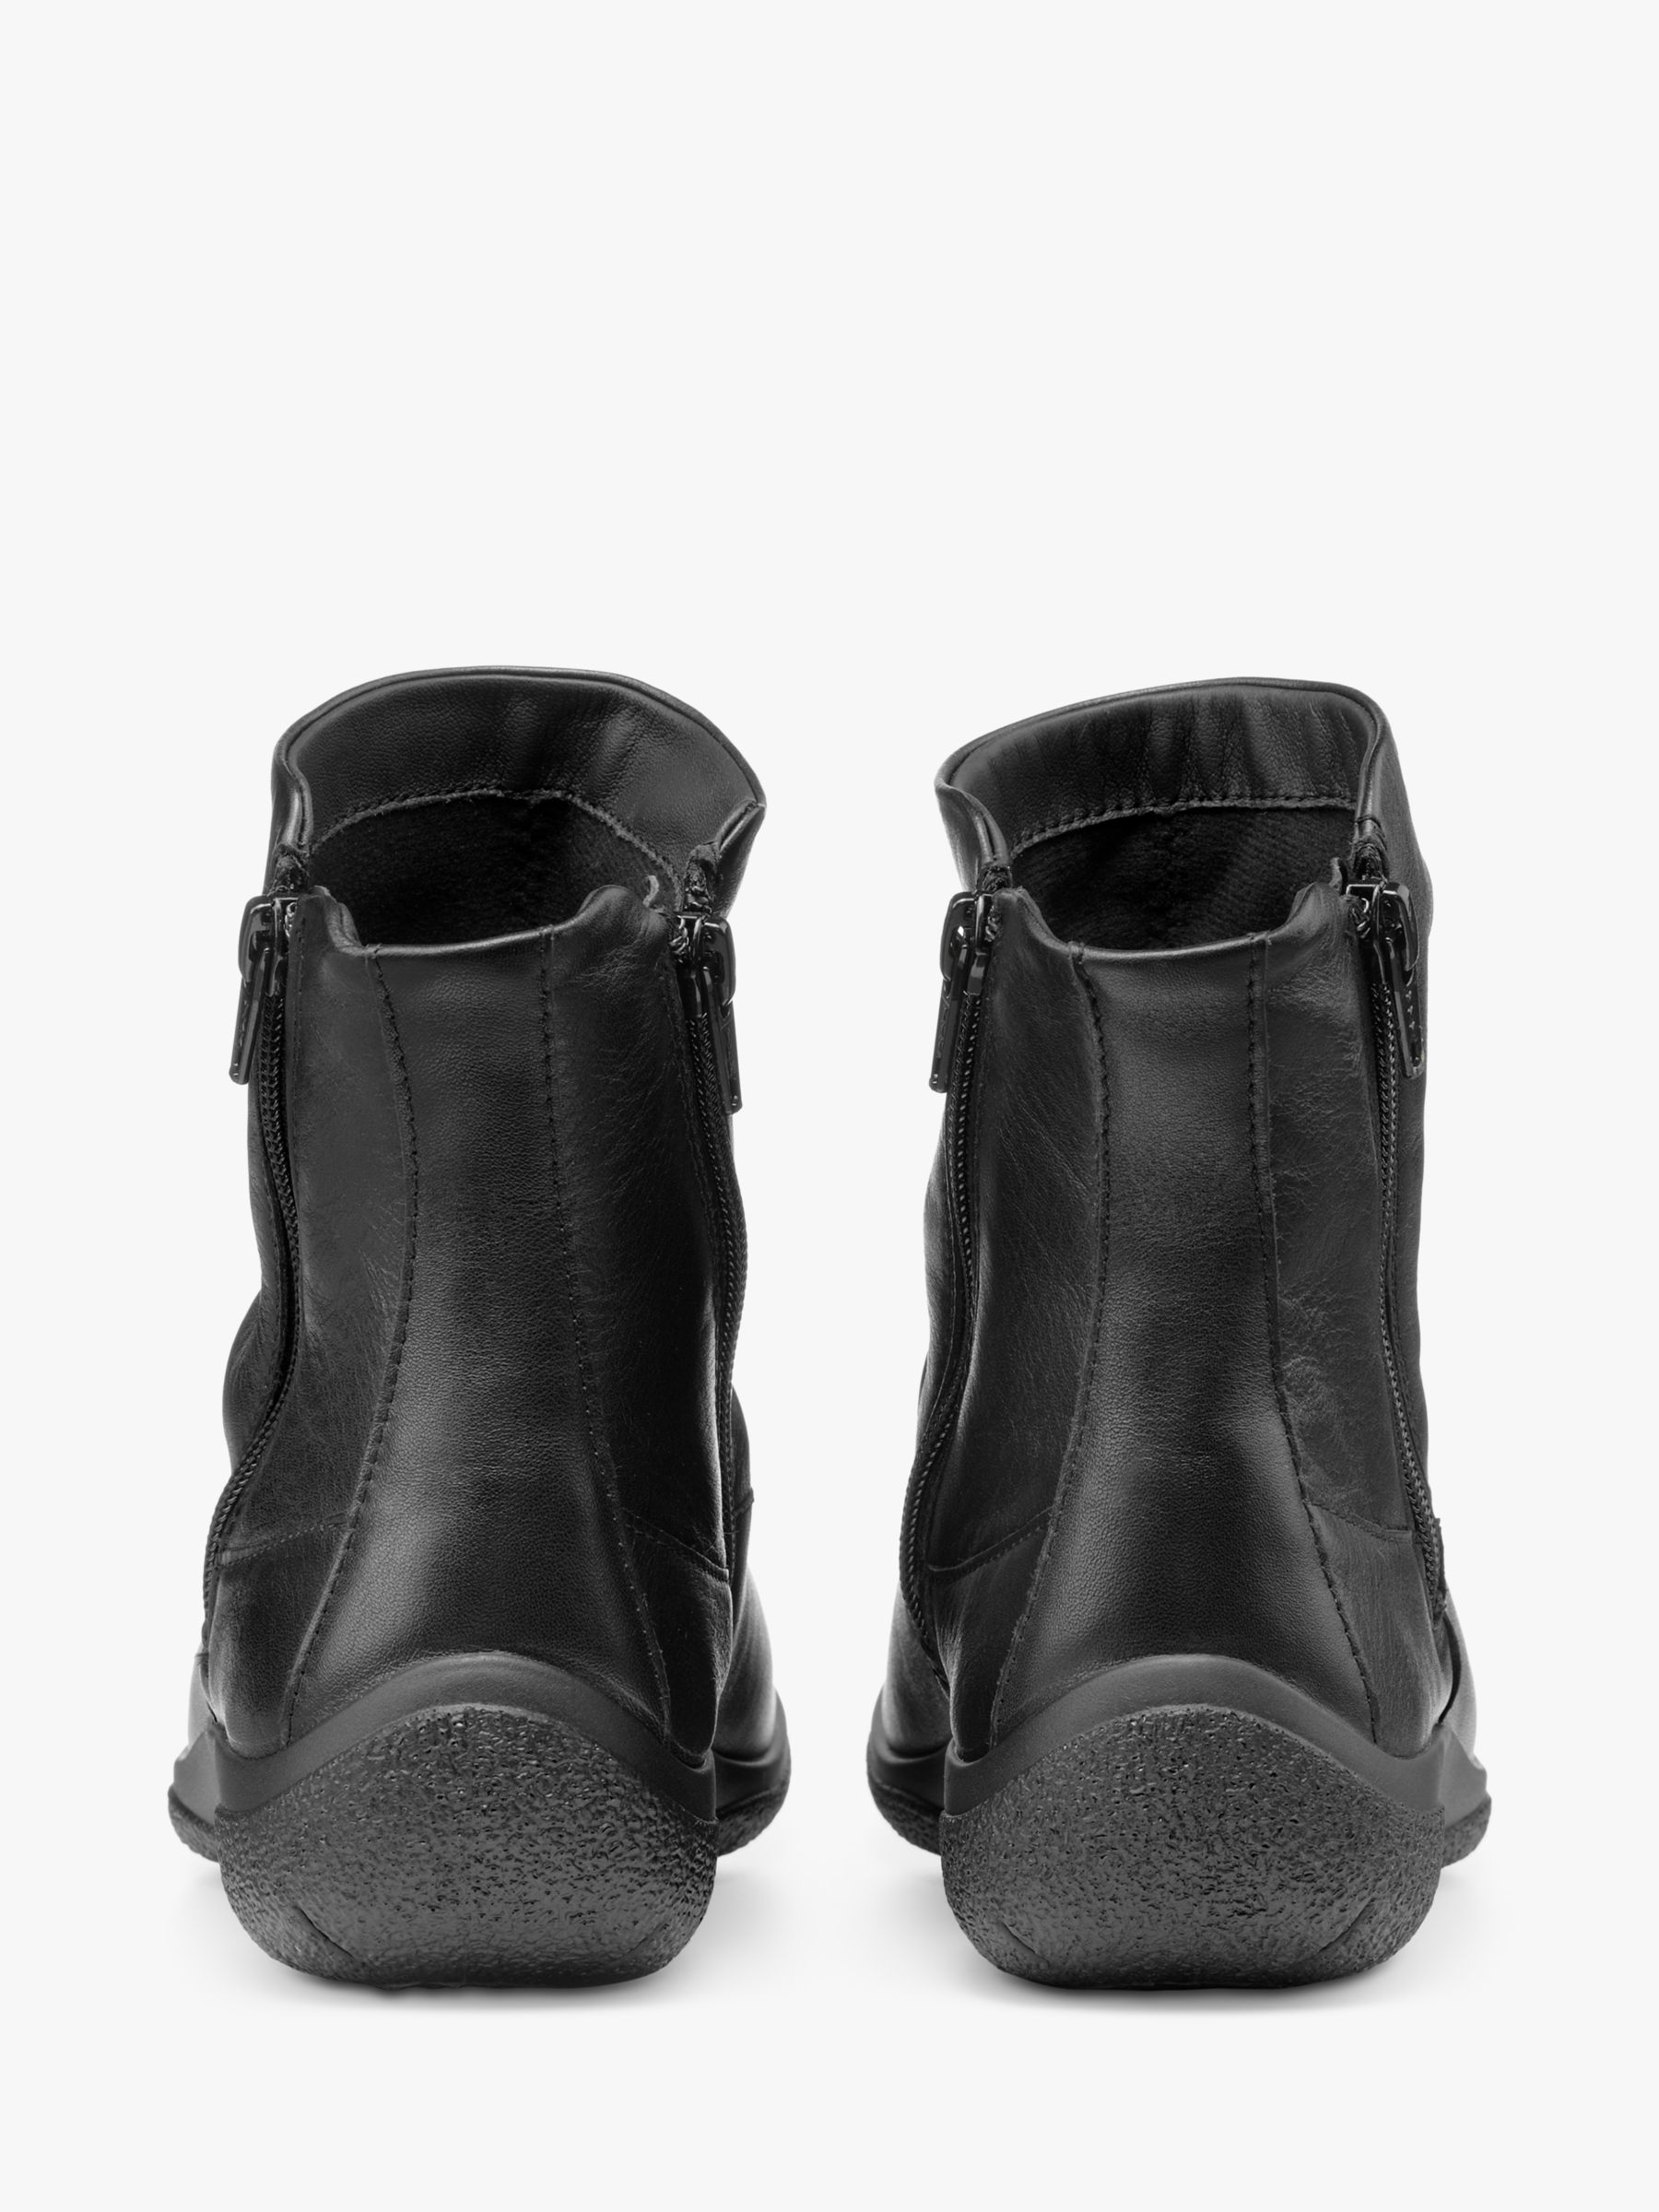 Hotter Whisper Extra Wide Fit Slouch Ankle Boots, Black, 6